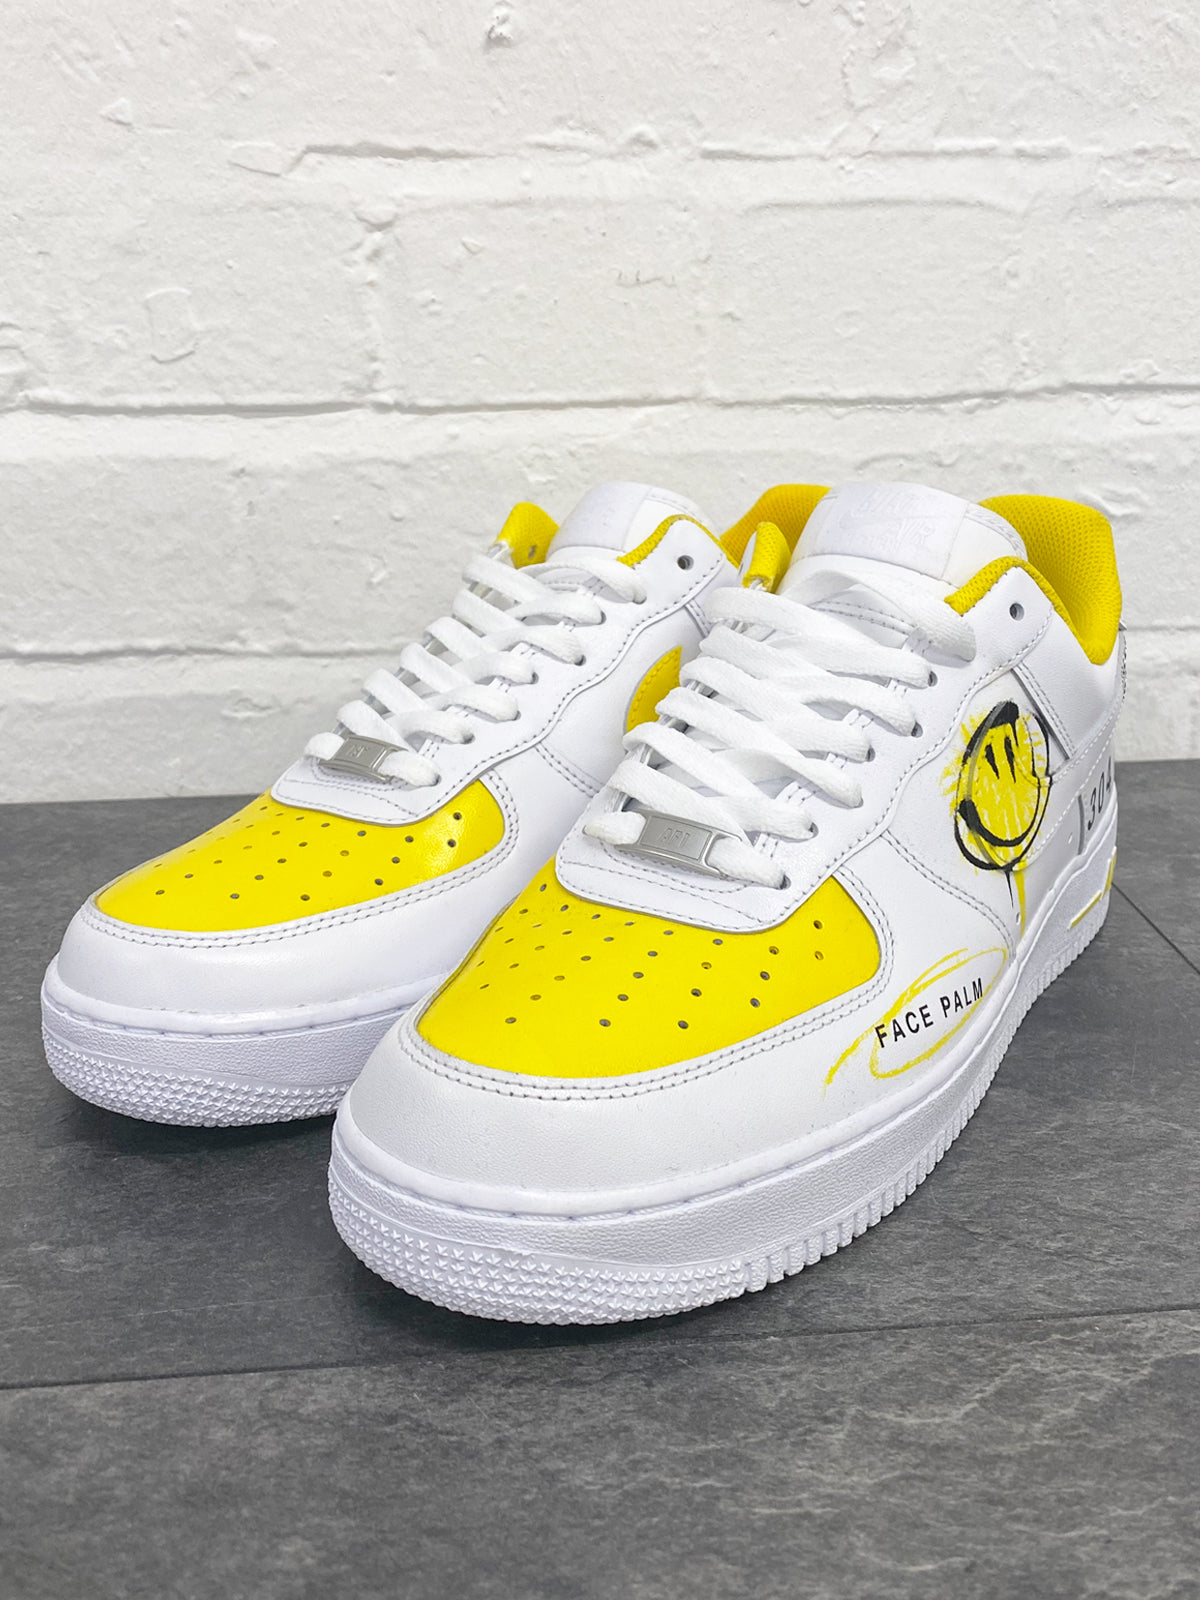 nike smiley face trainers